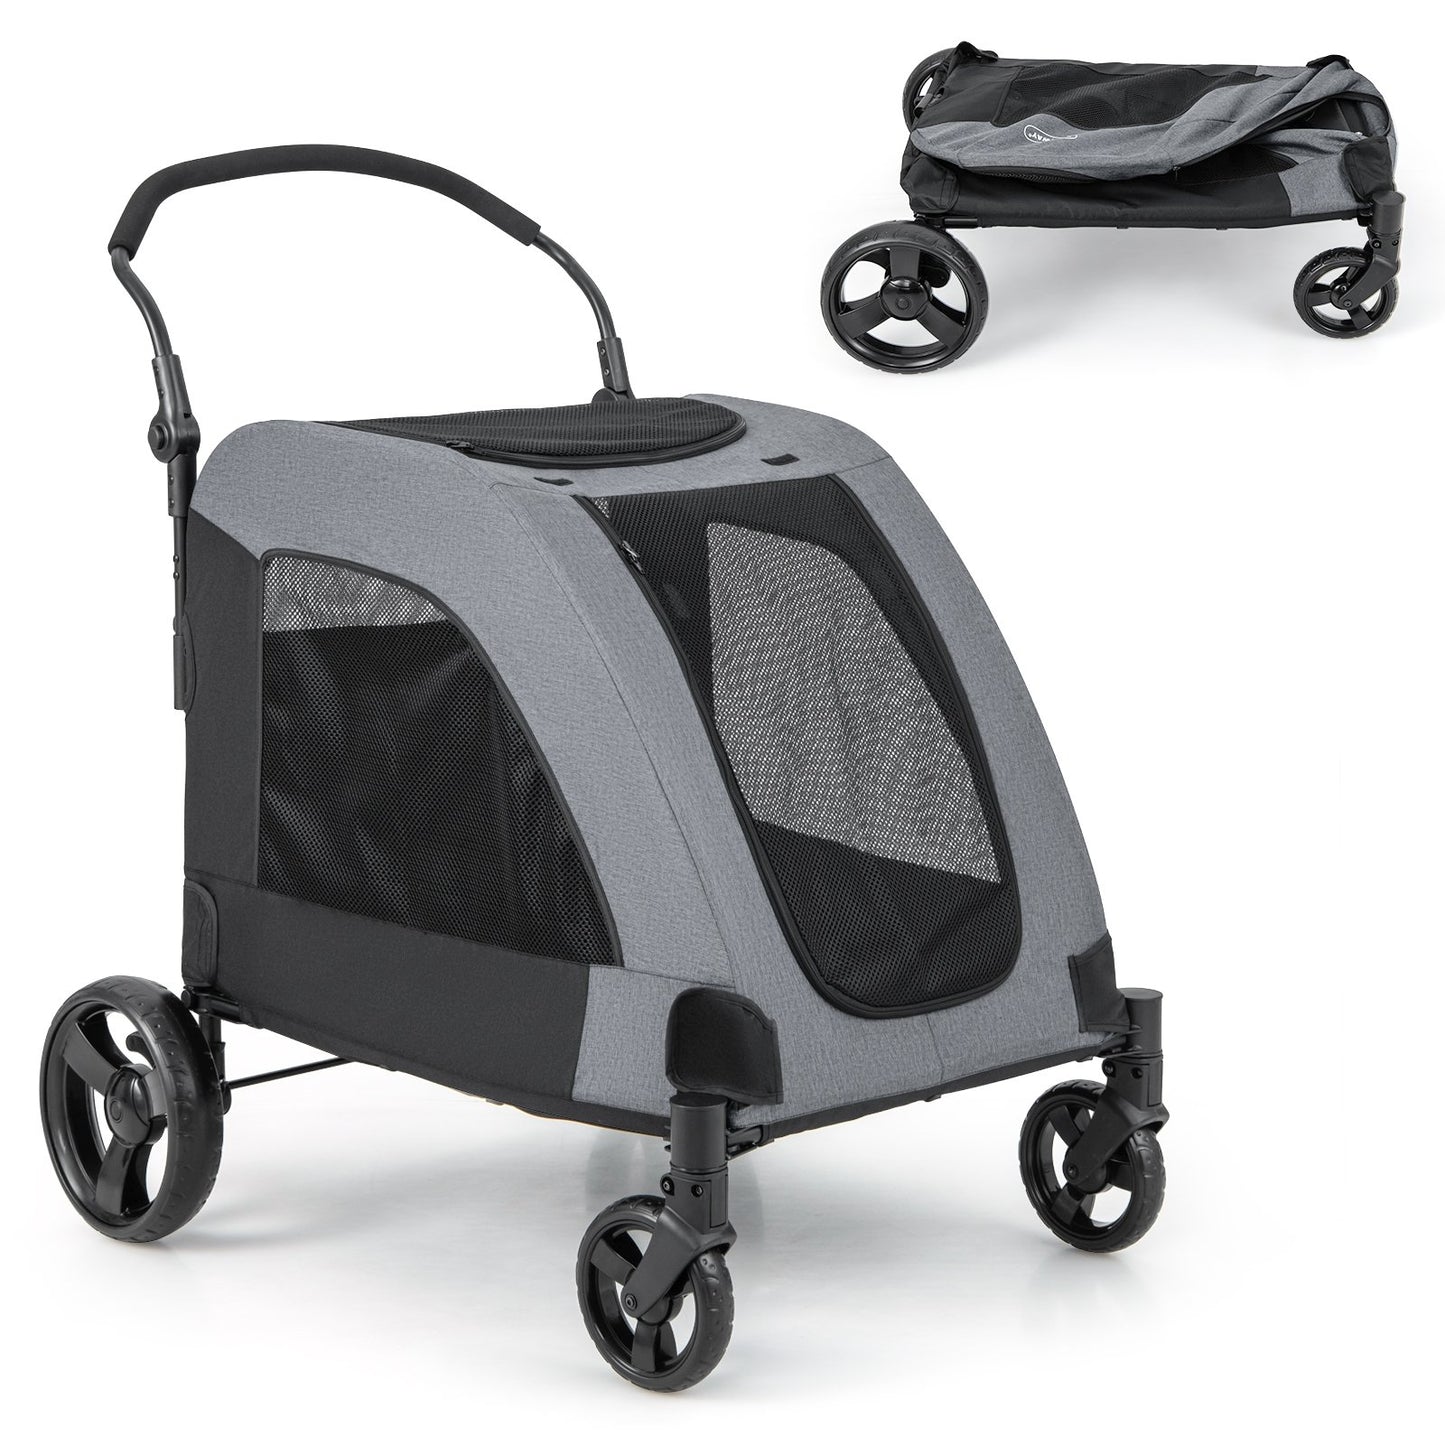 4 Wheels Extra Large Dog Stroller Foldable Pet Stroller with Dual Entry, Gray